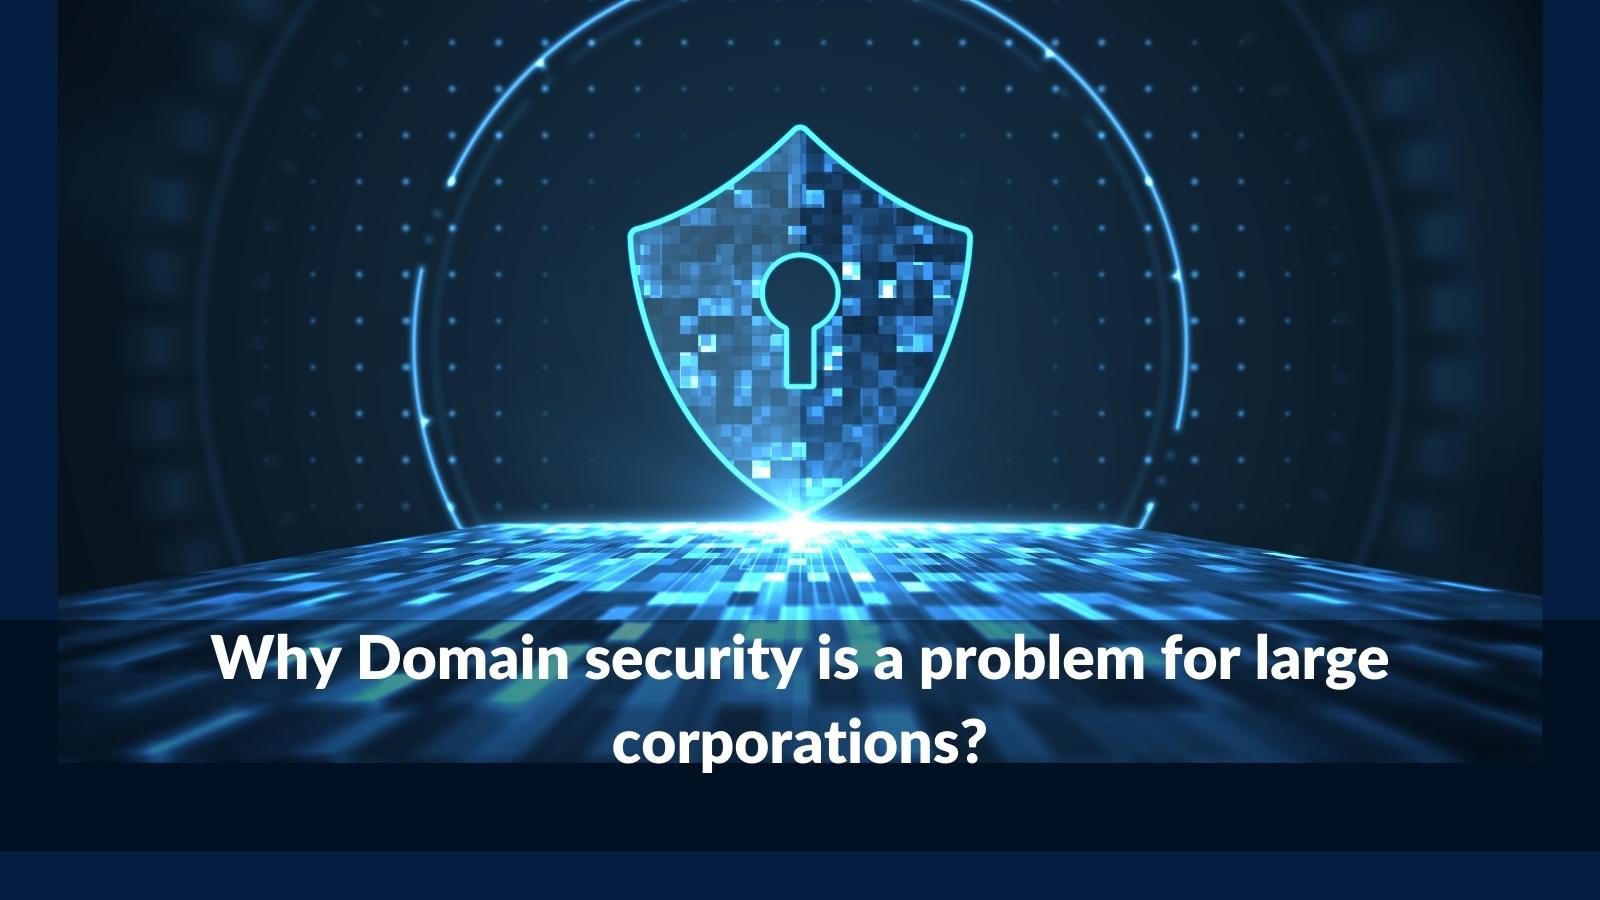 Why Domain security is a problem for large corporations